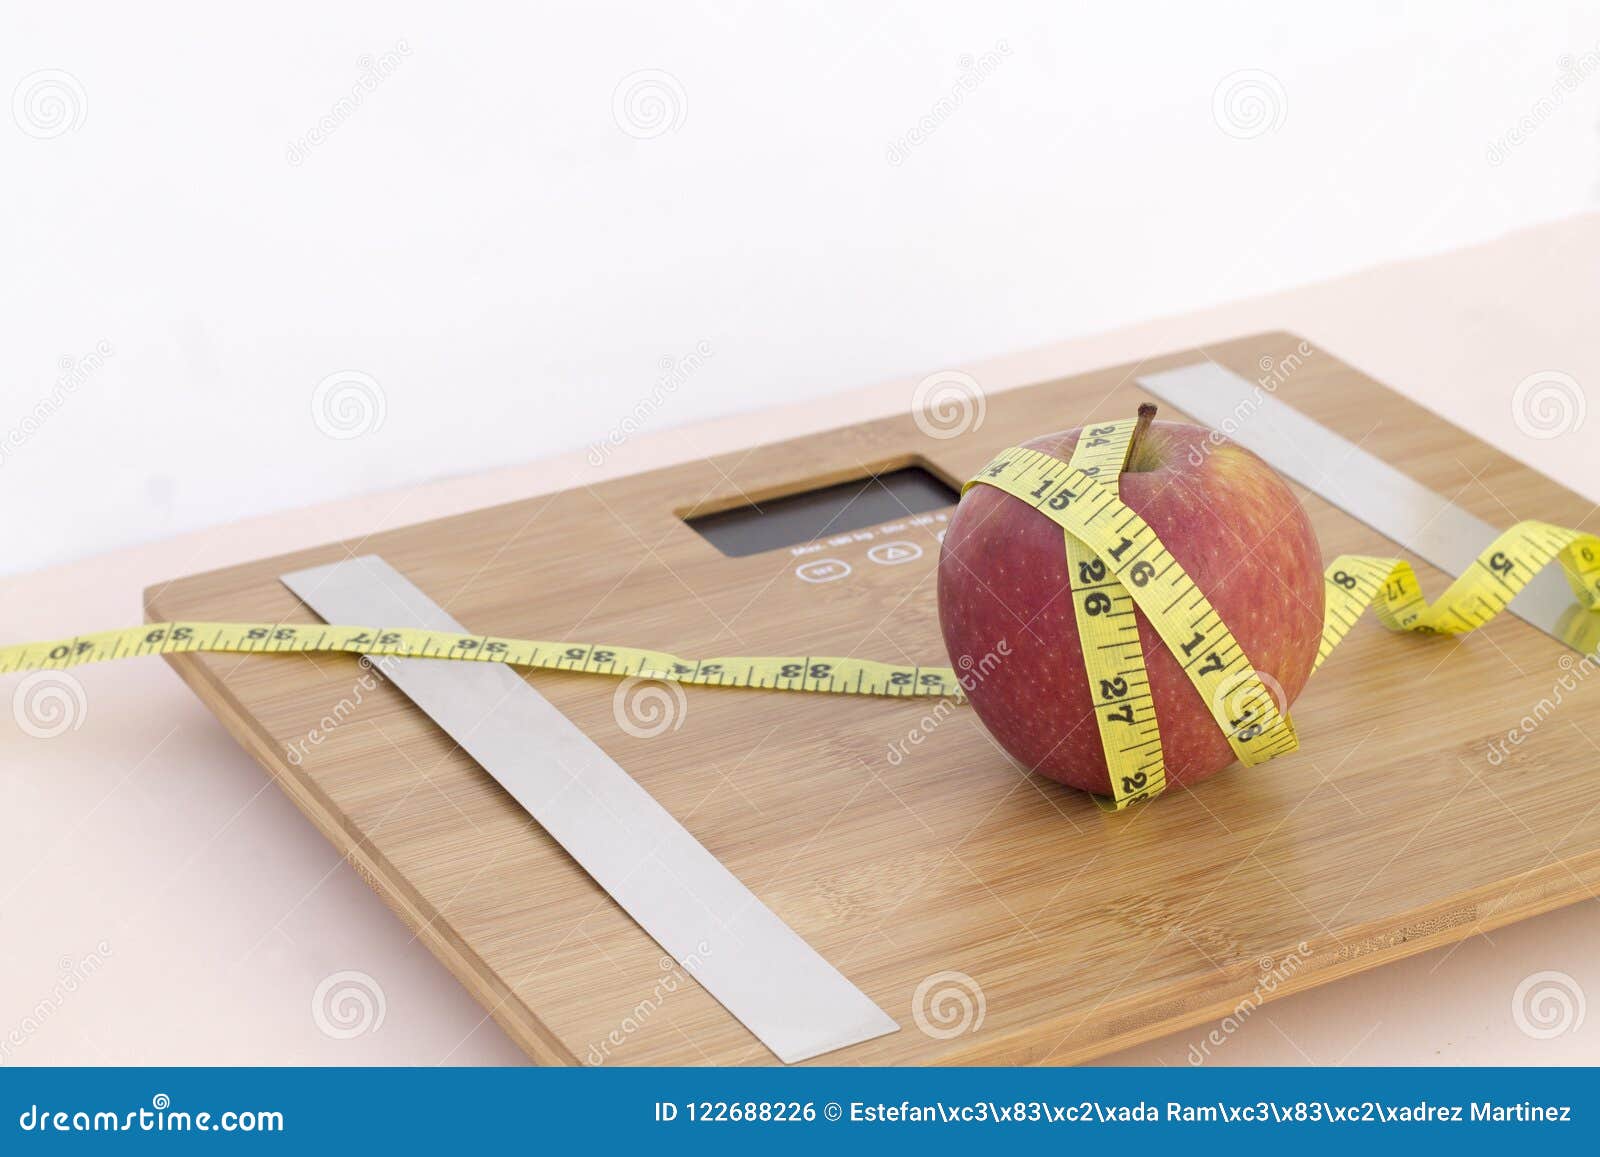 still life photography with an apple, tape mesaure and a scale